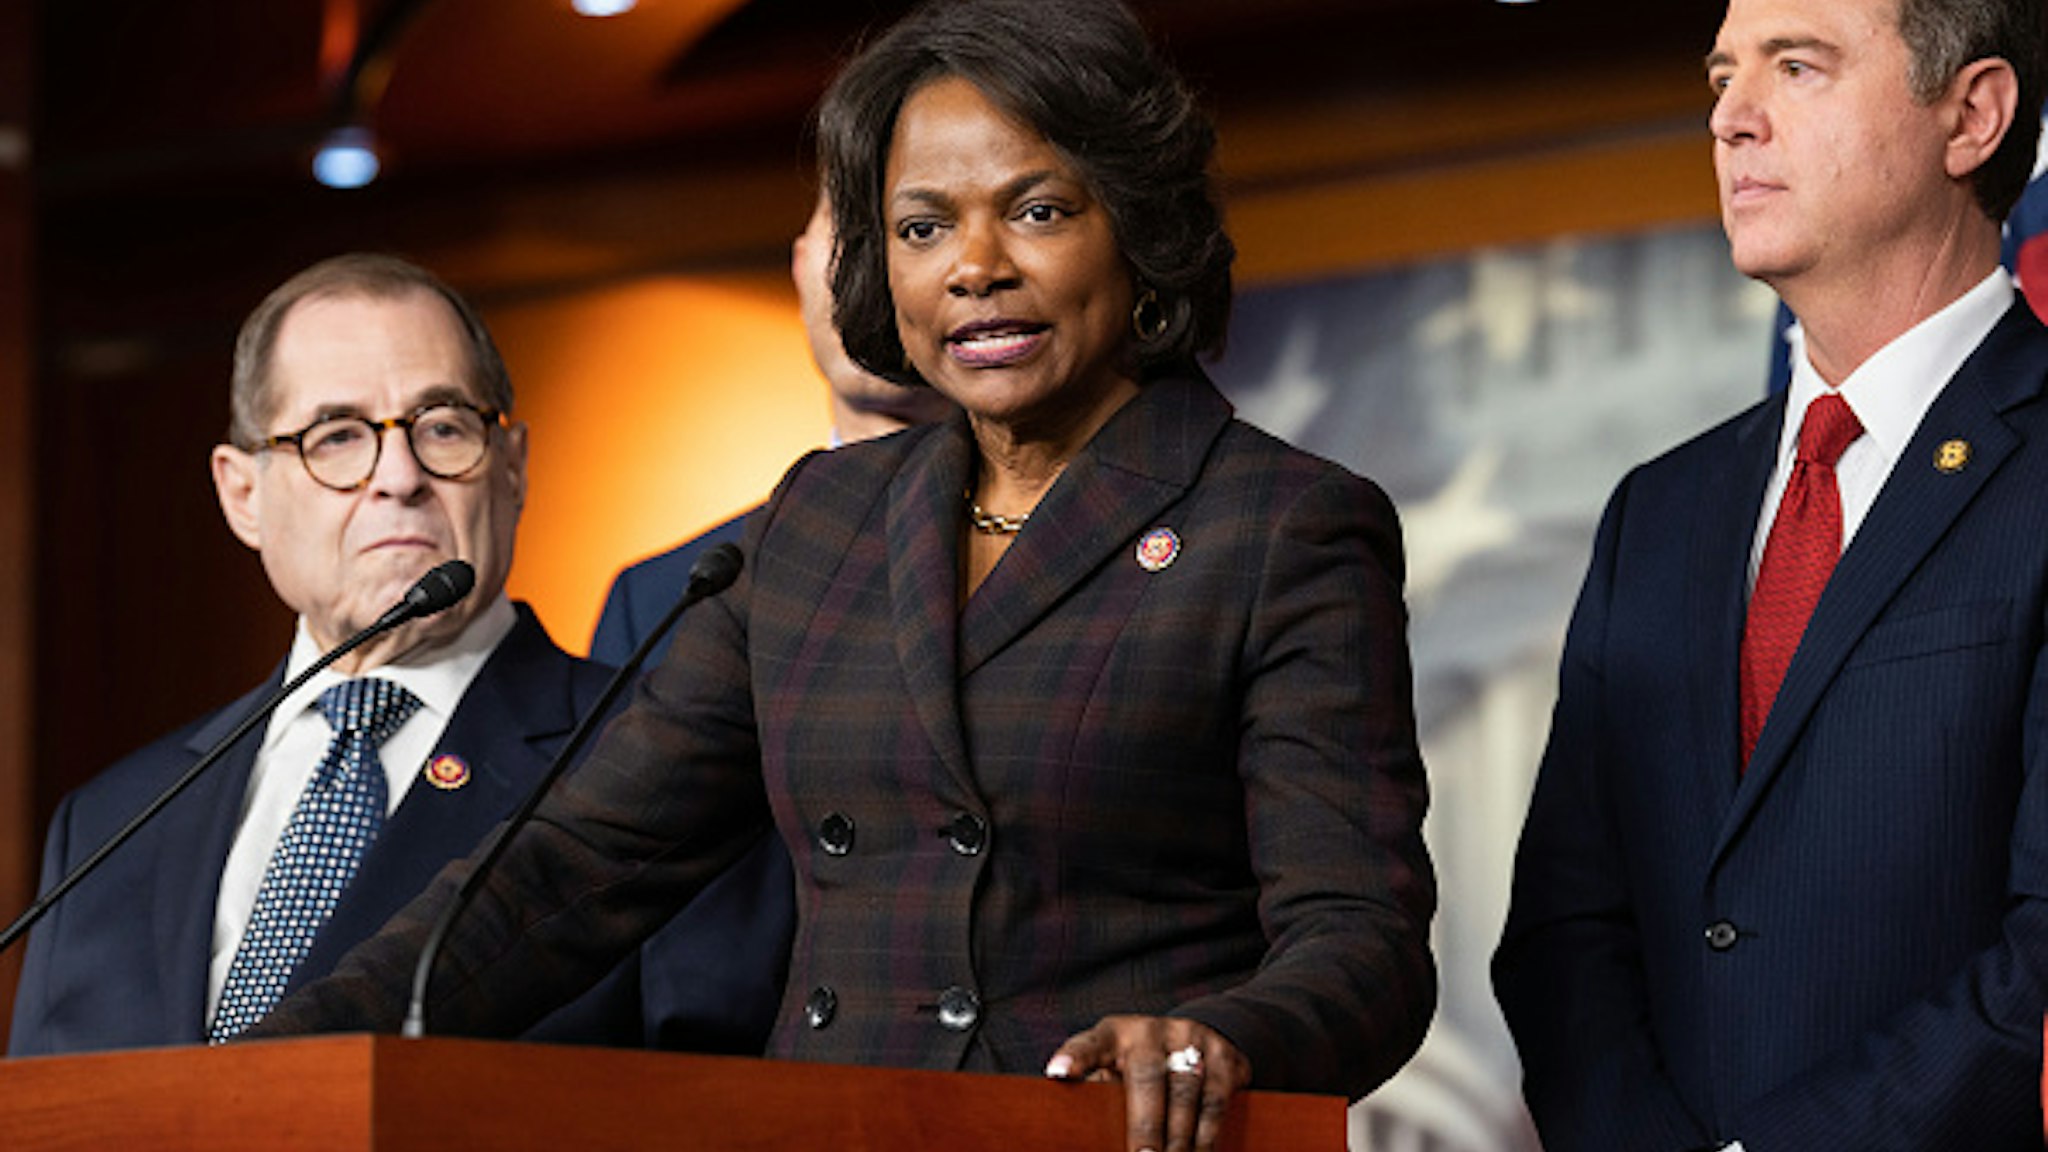 WASHINGTON, UNITED STATES - JANUARY 28 2020: U.S. Representative, Val Demings (D-FL) speaking about the Senate impeachment trial.- PHOTOGRAPH BY Michael Brochstein / Echoes Wire/ Barcroft Media